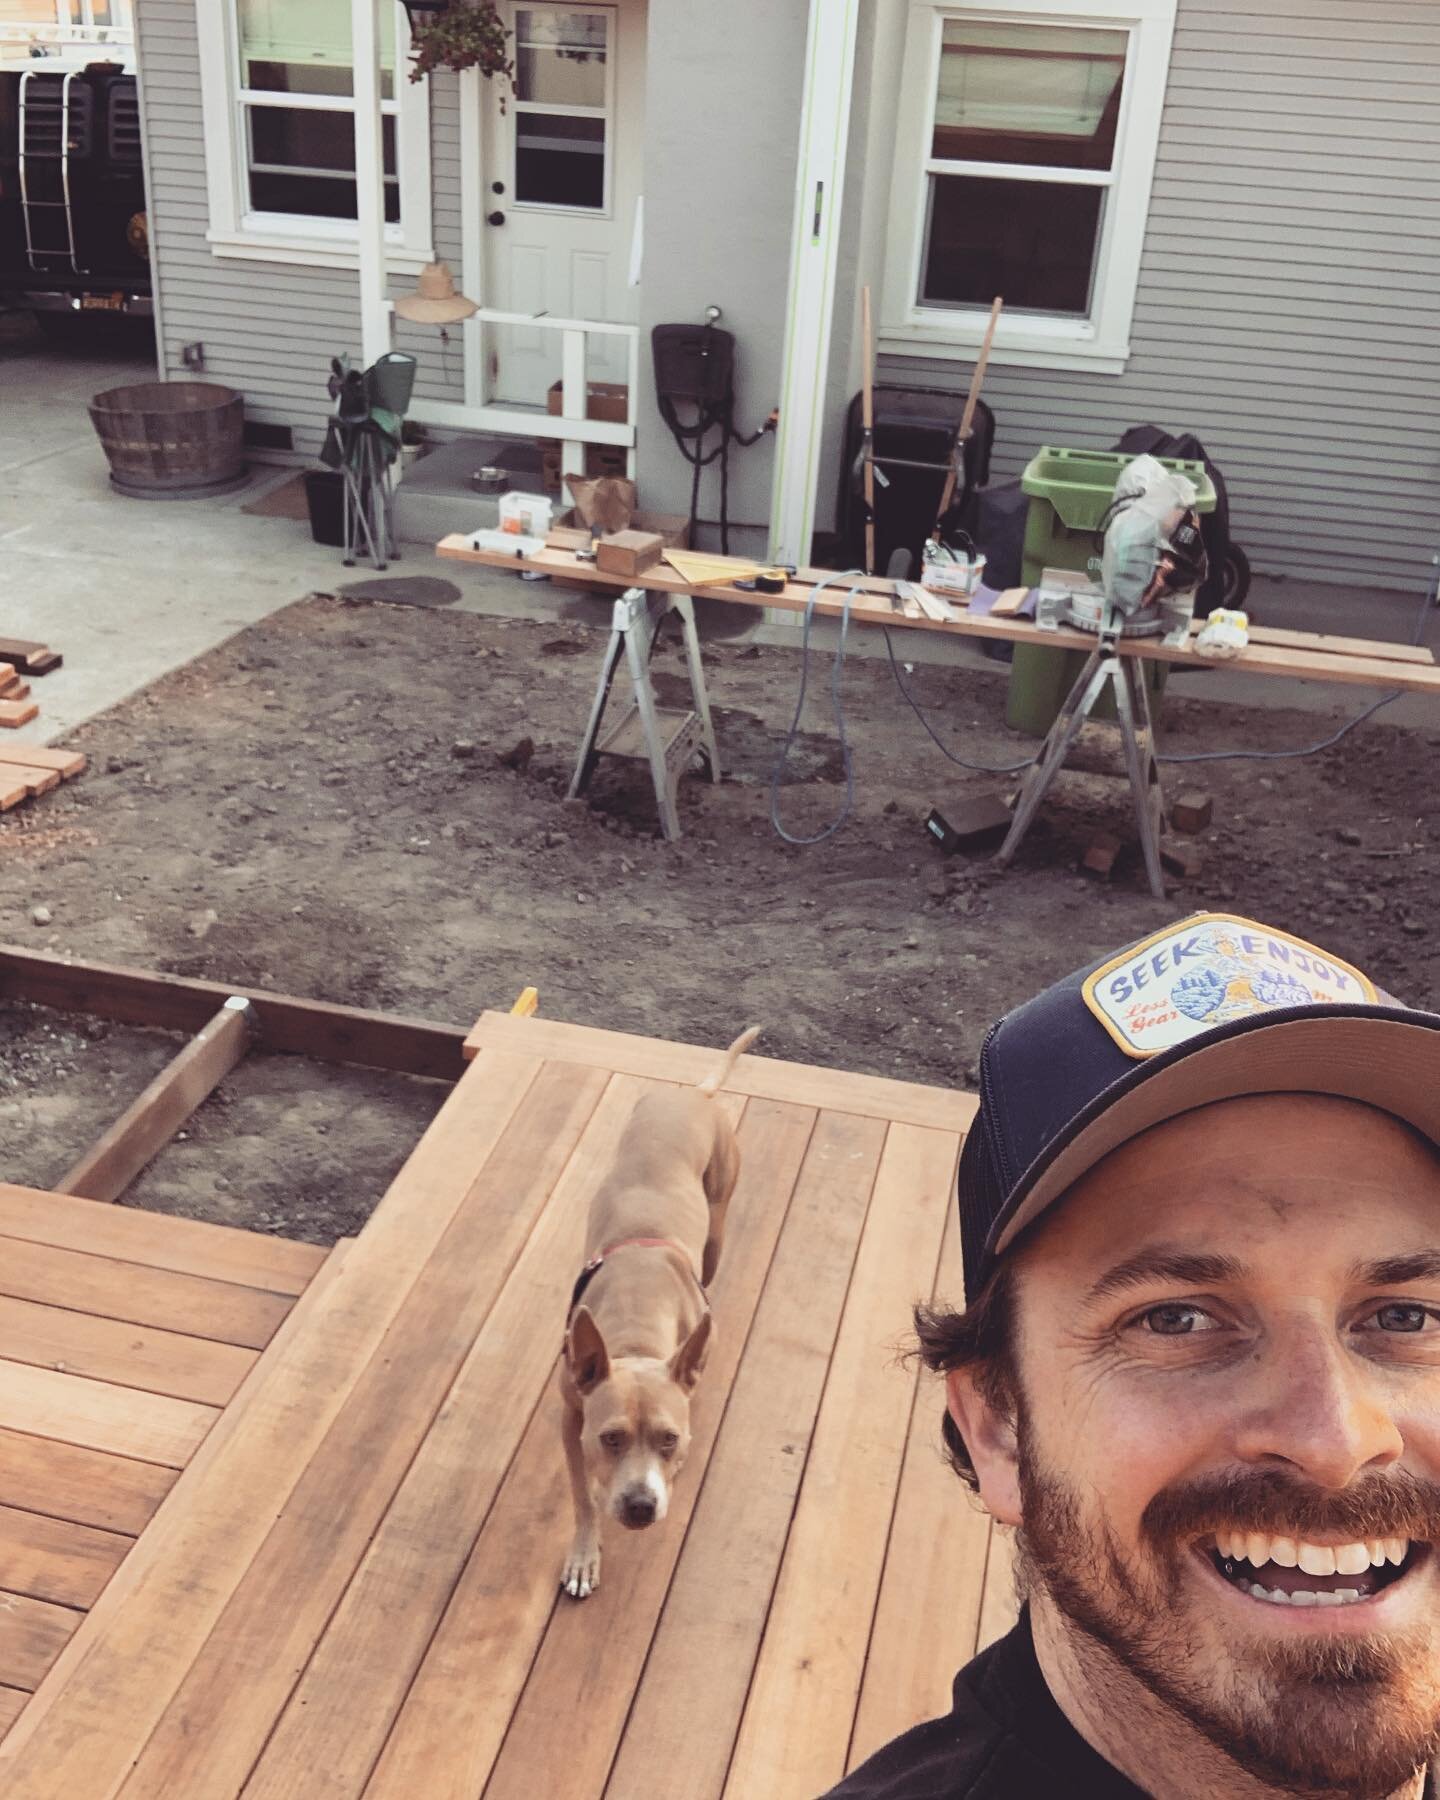 She and me. Building a deck. Building a home.